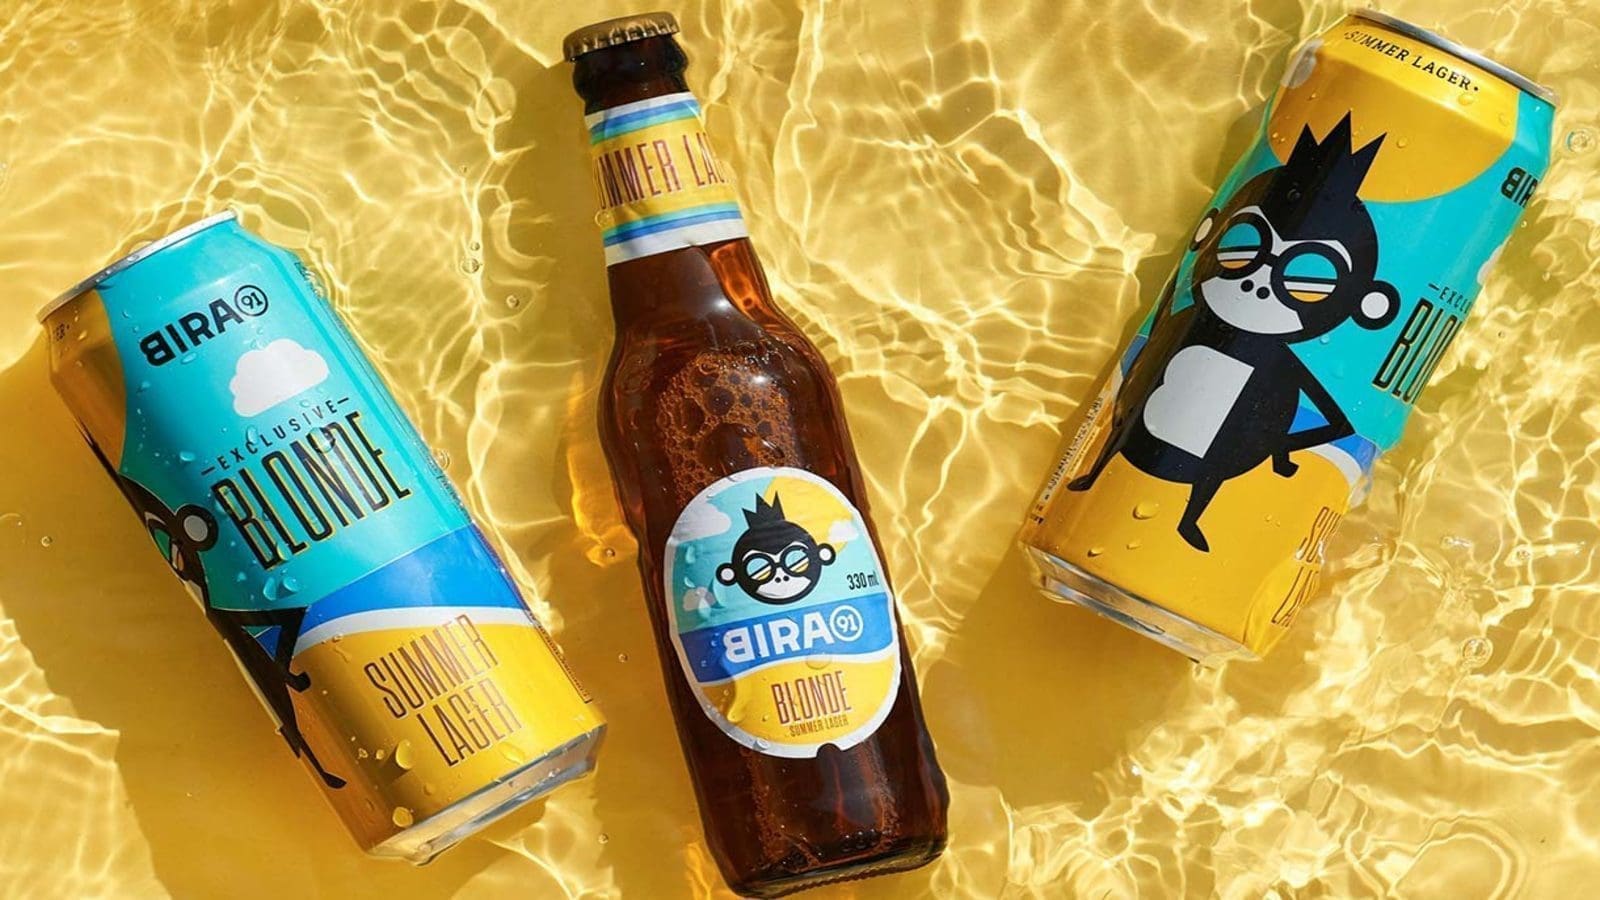 Kirin Holdings seeks to invest more in Indian craft beer maker Bira 91 amid shrinking sales in Japan